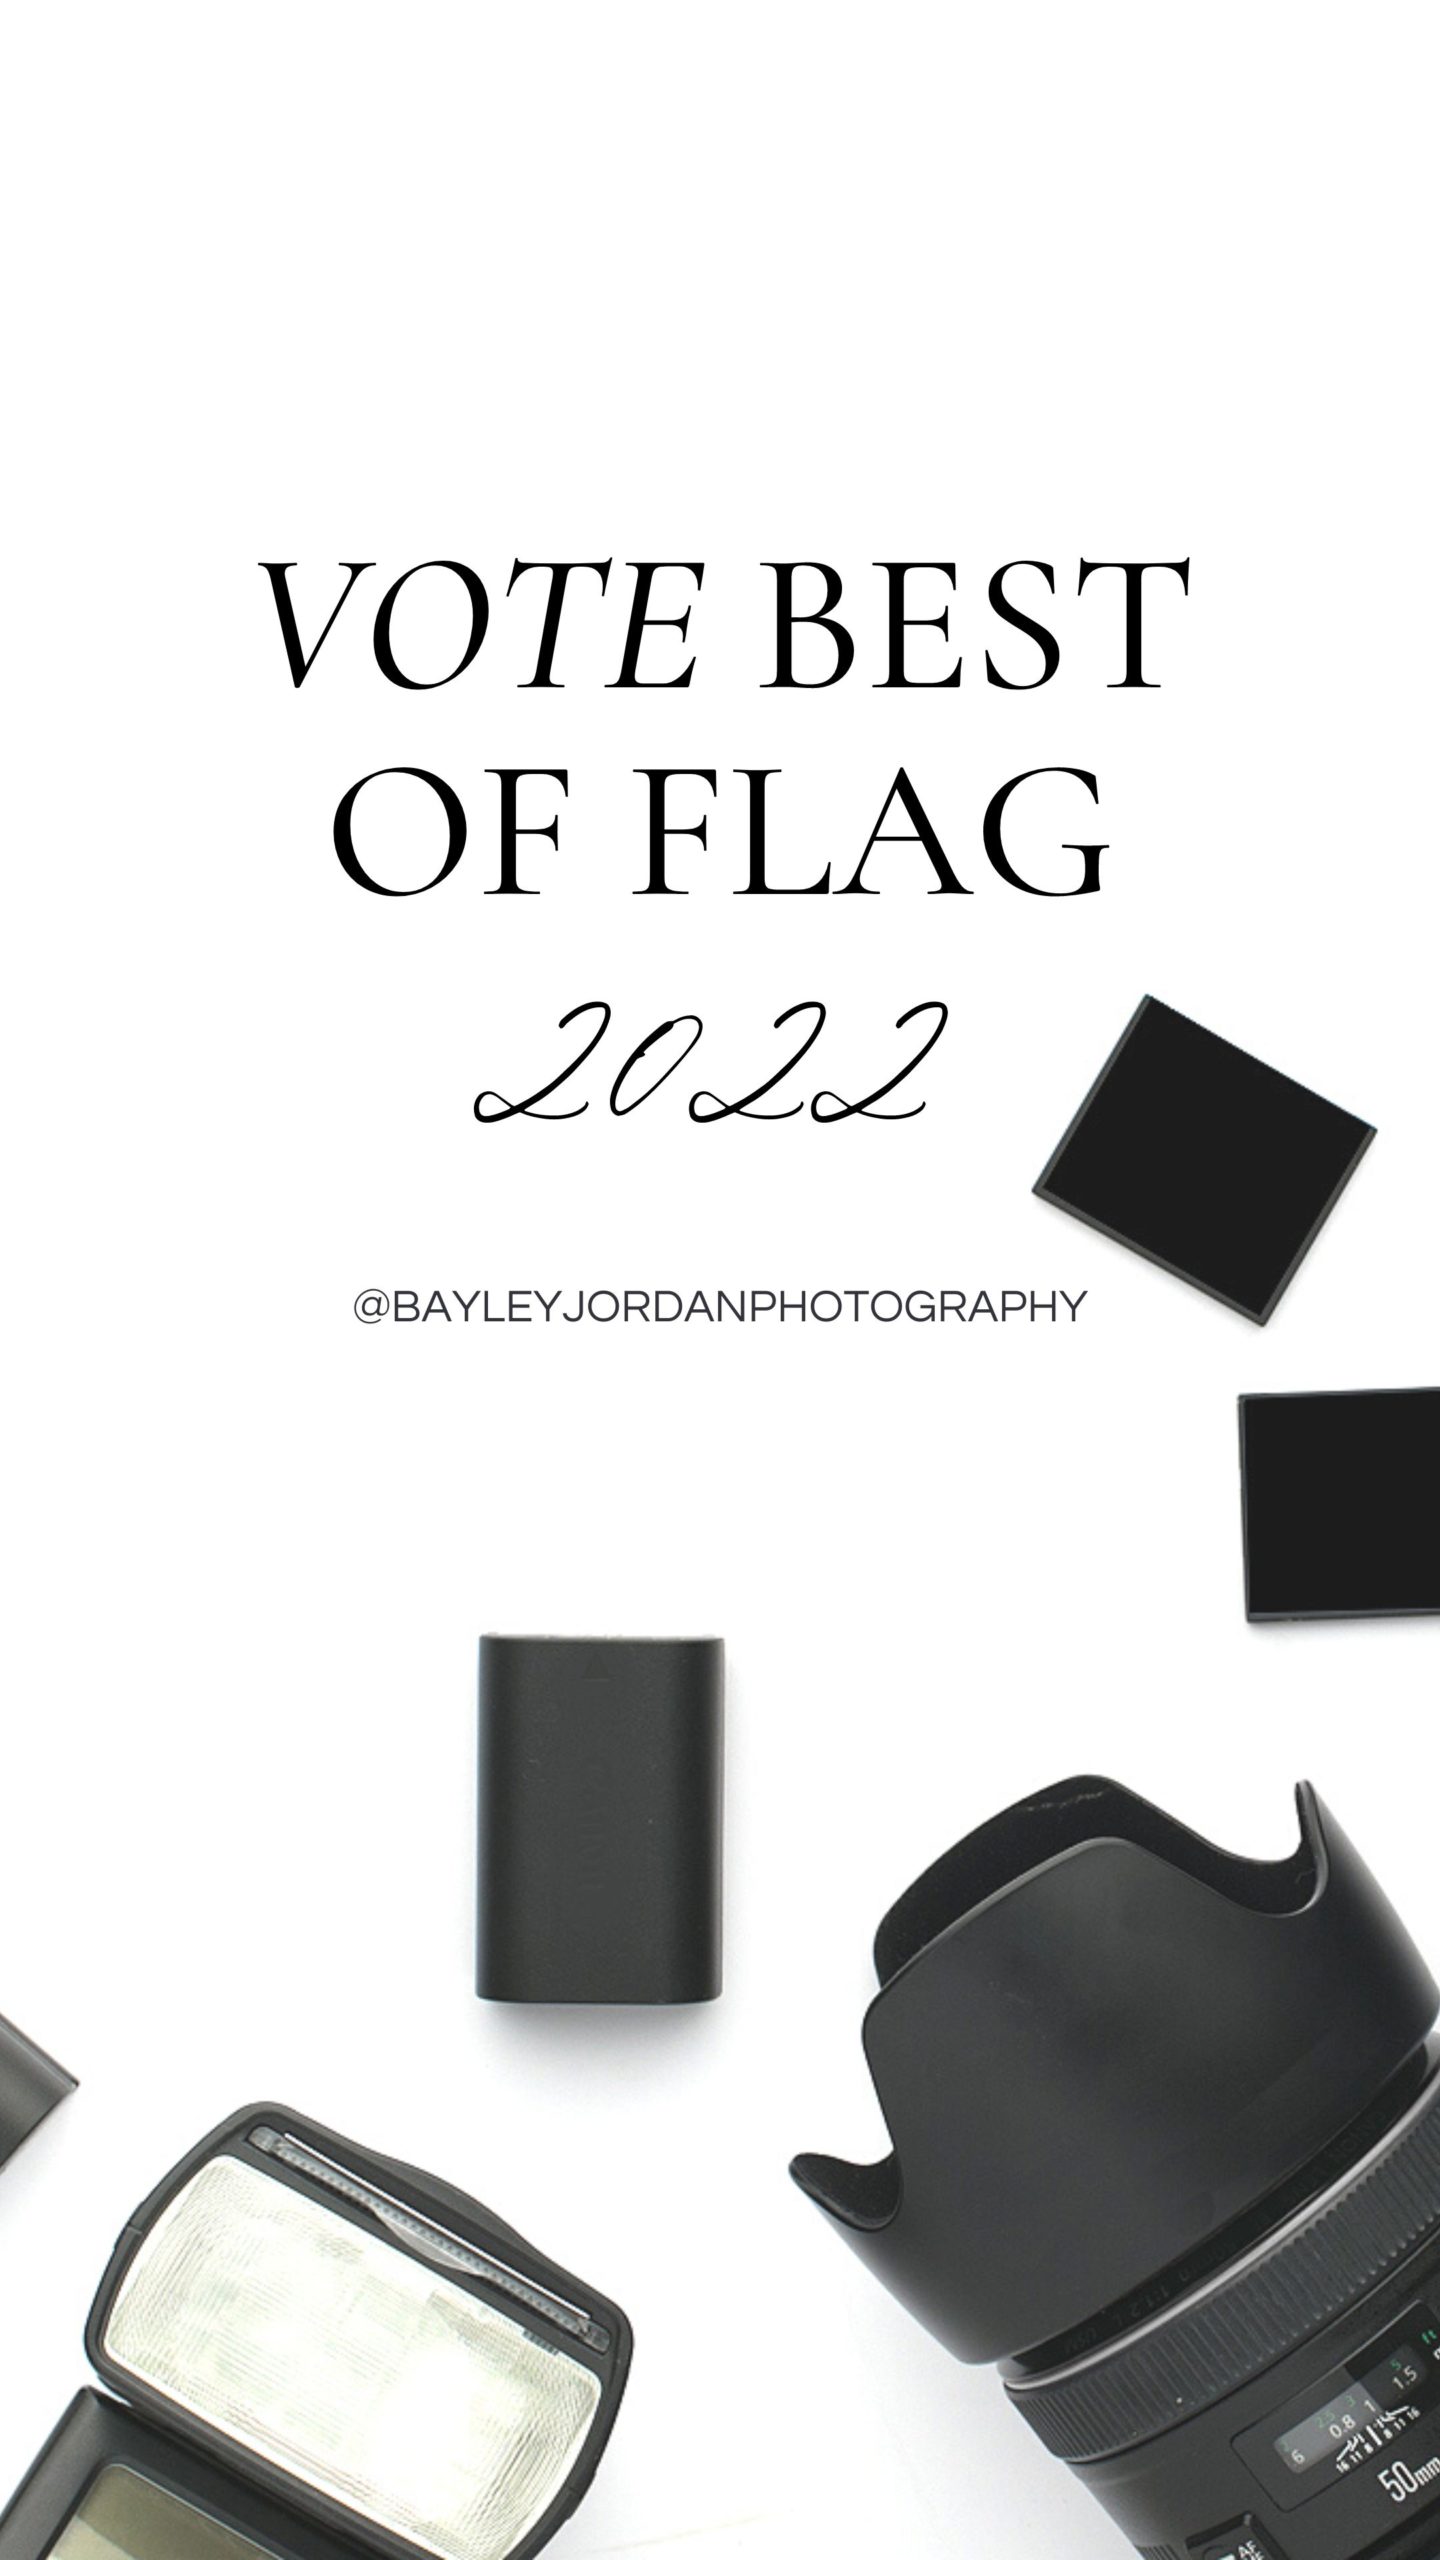 Learn how to vote Bayley Jordan Photography Best of Flag